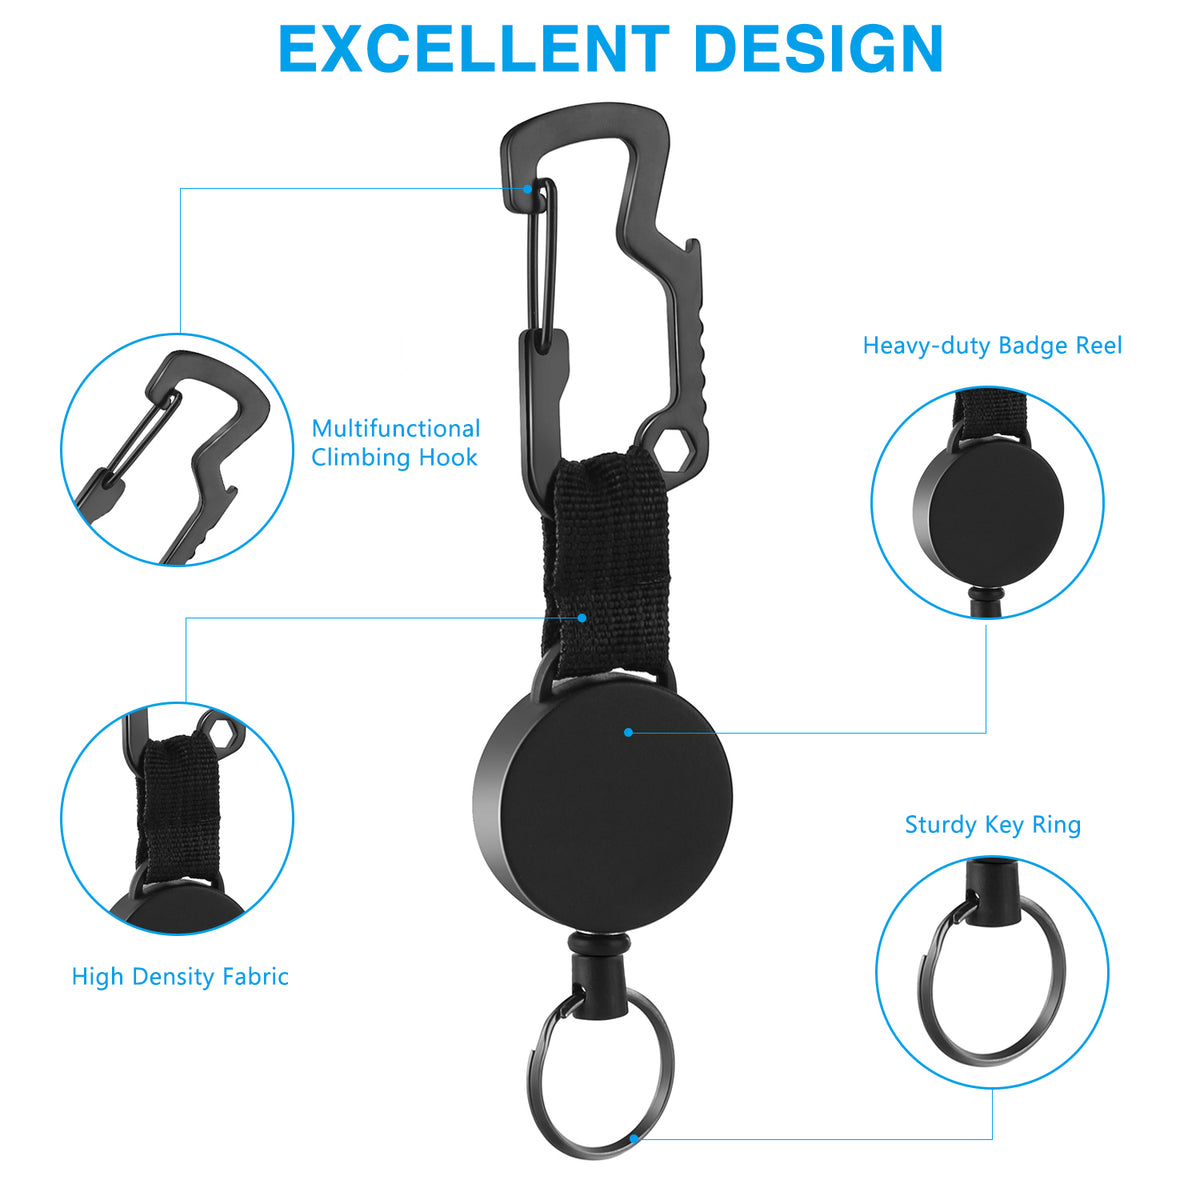 3 pcs/lot Retractable Keychain Heavy Duty Badge Holder Reel with Multitool  Carabiner Clip Key Ring with Steel Wire Supplies